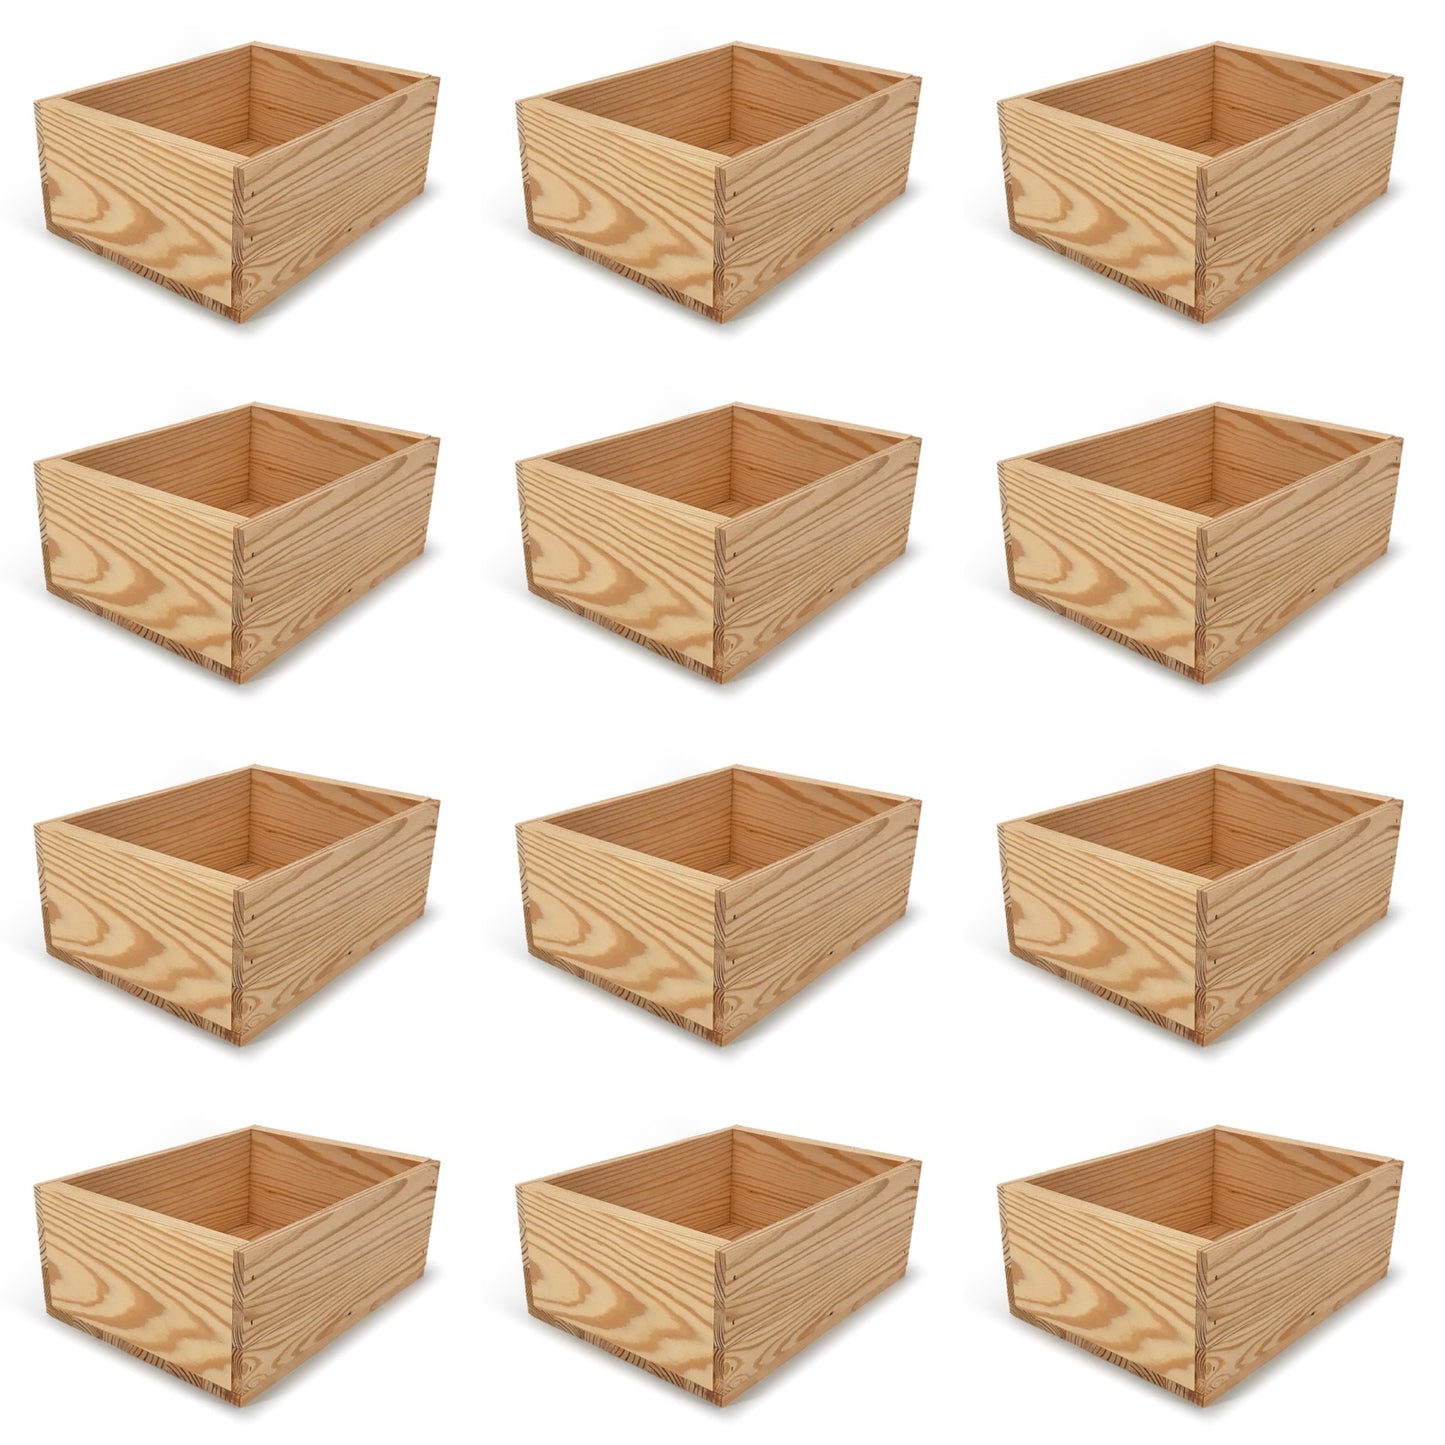 12 Small wooden crates 10x8x4.25